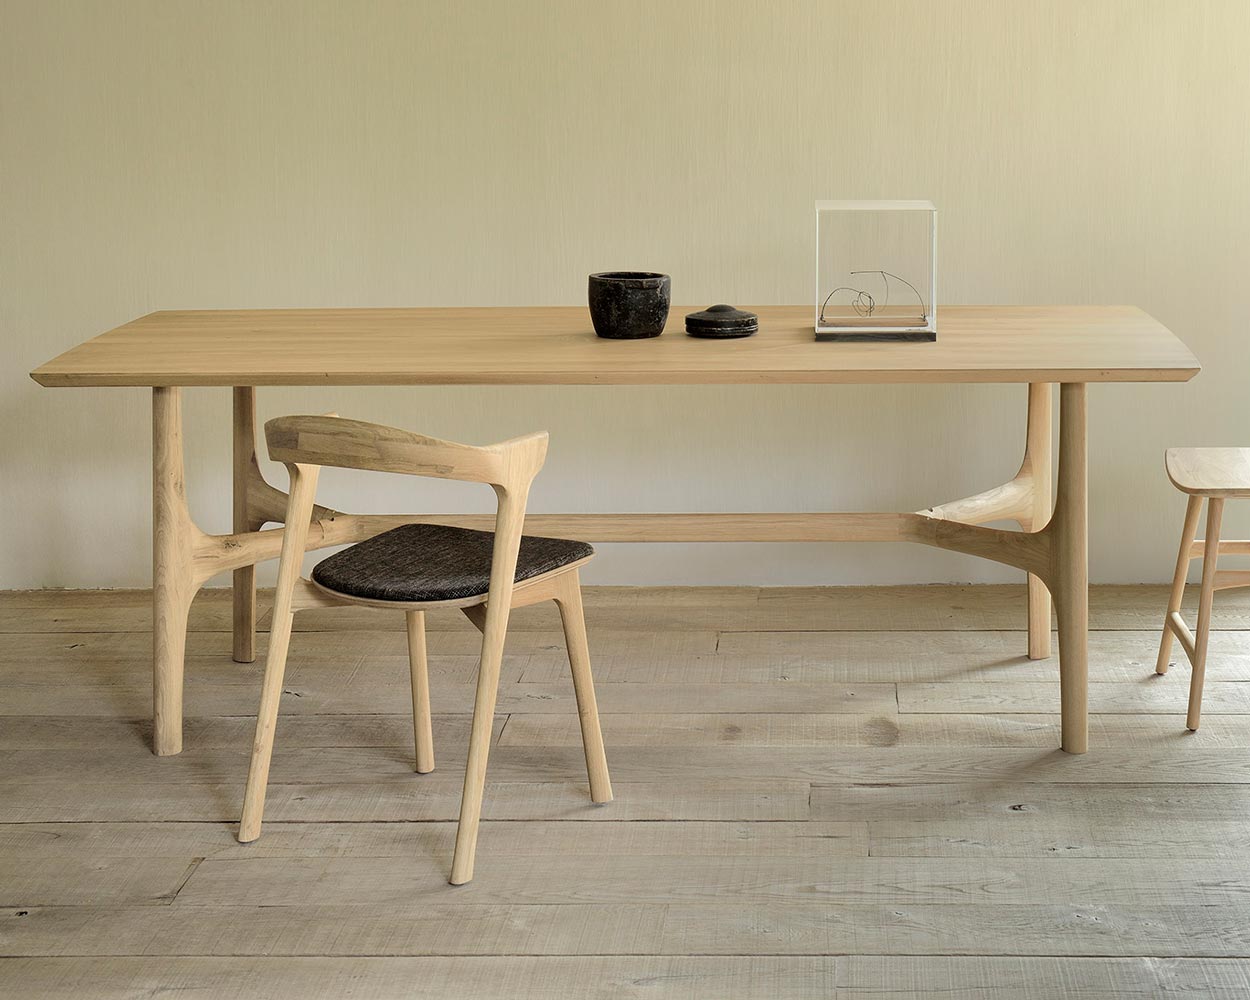 Nexus Dining table by Ethnicraft